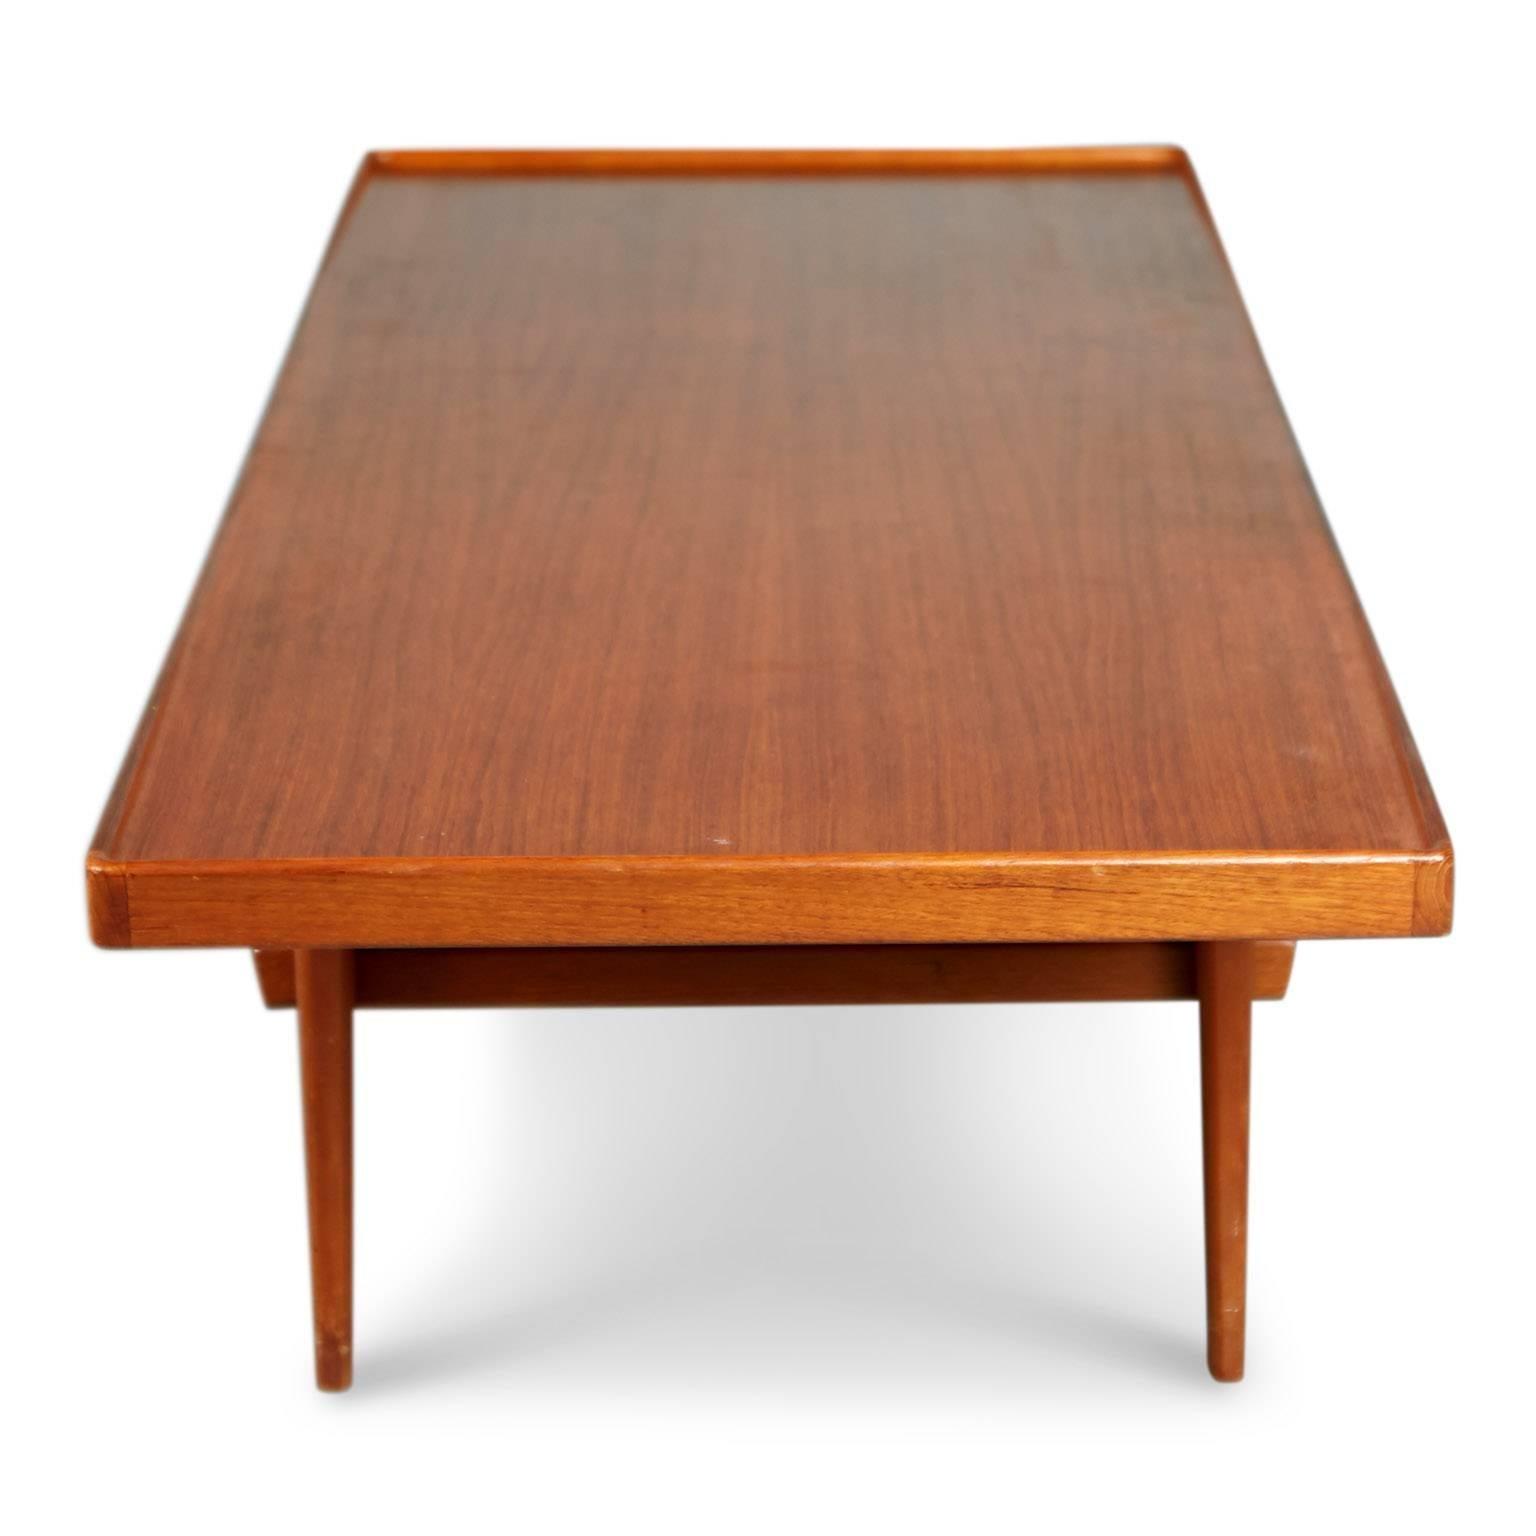 Scandinavian Modern Danish Modern Coffee Table with Removable Trays by Poul Jensen for Selig